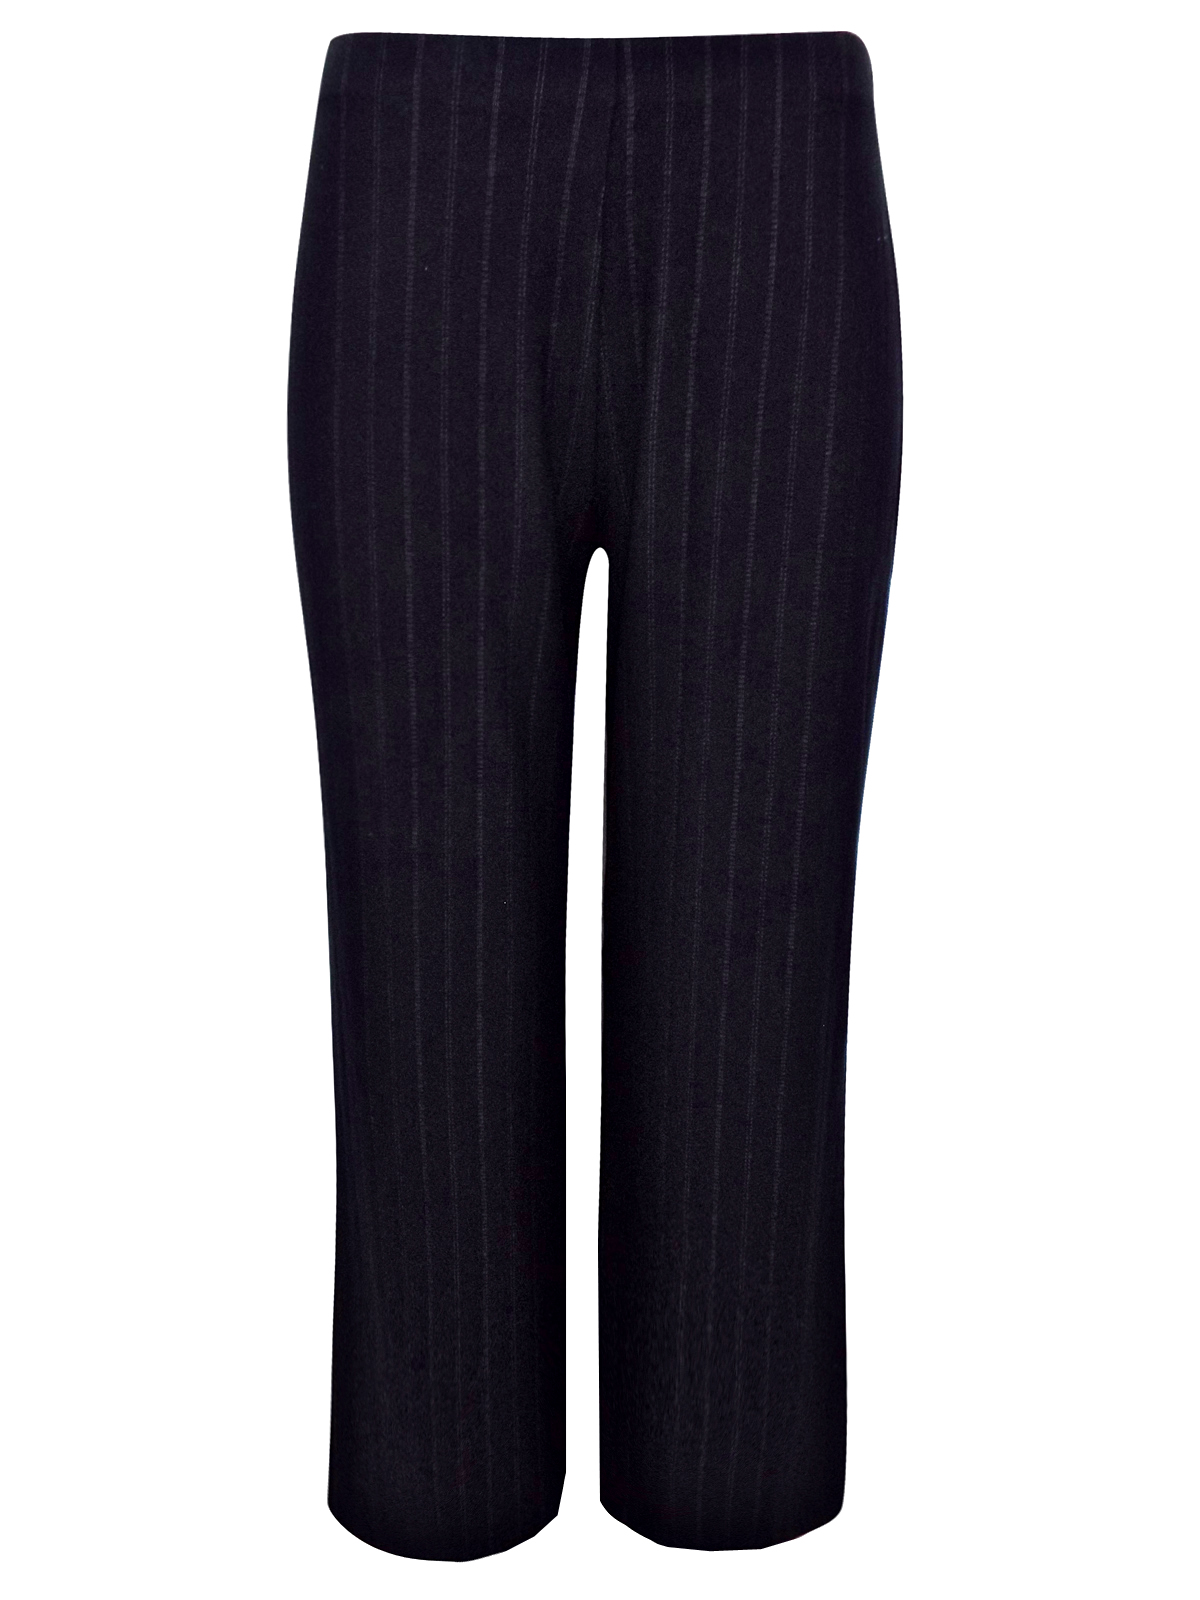 Marks and Spencer - - M&5 BLACK Pinstripe Wide Leg Trousers - Size 12 to 18